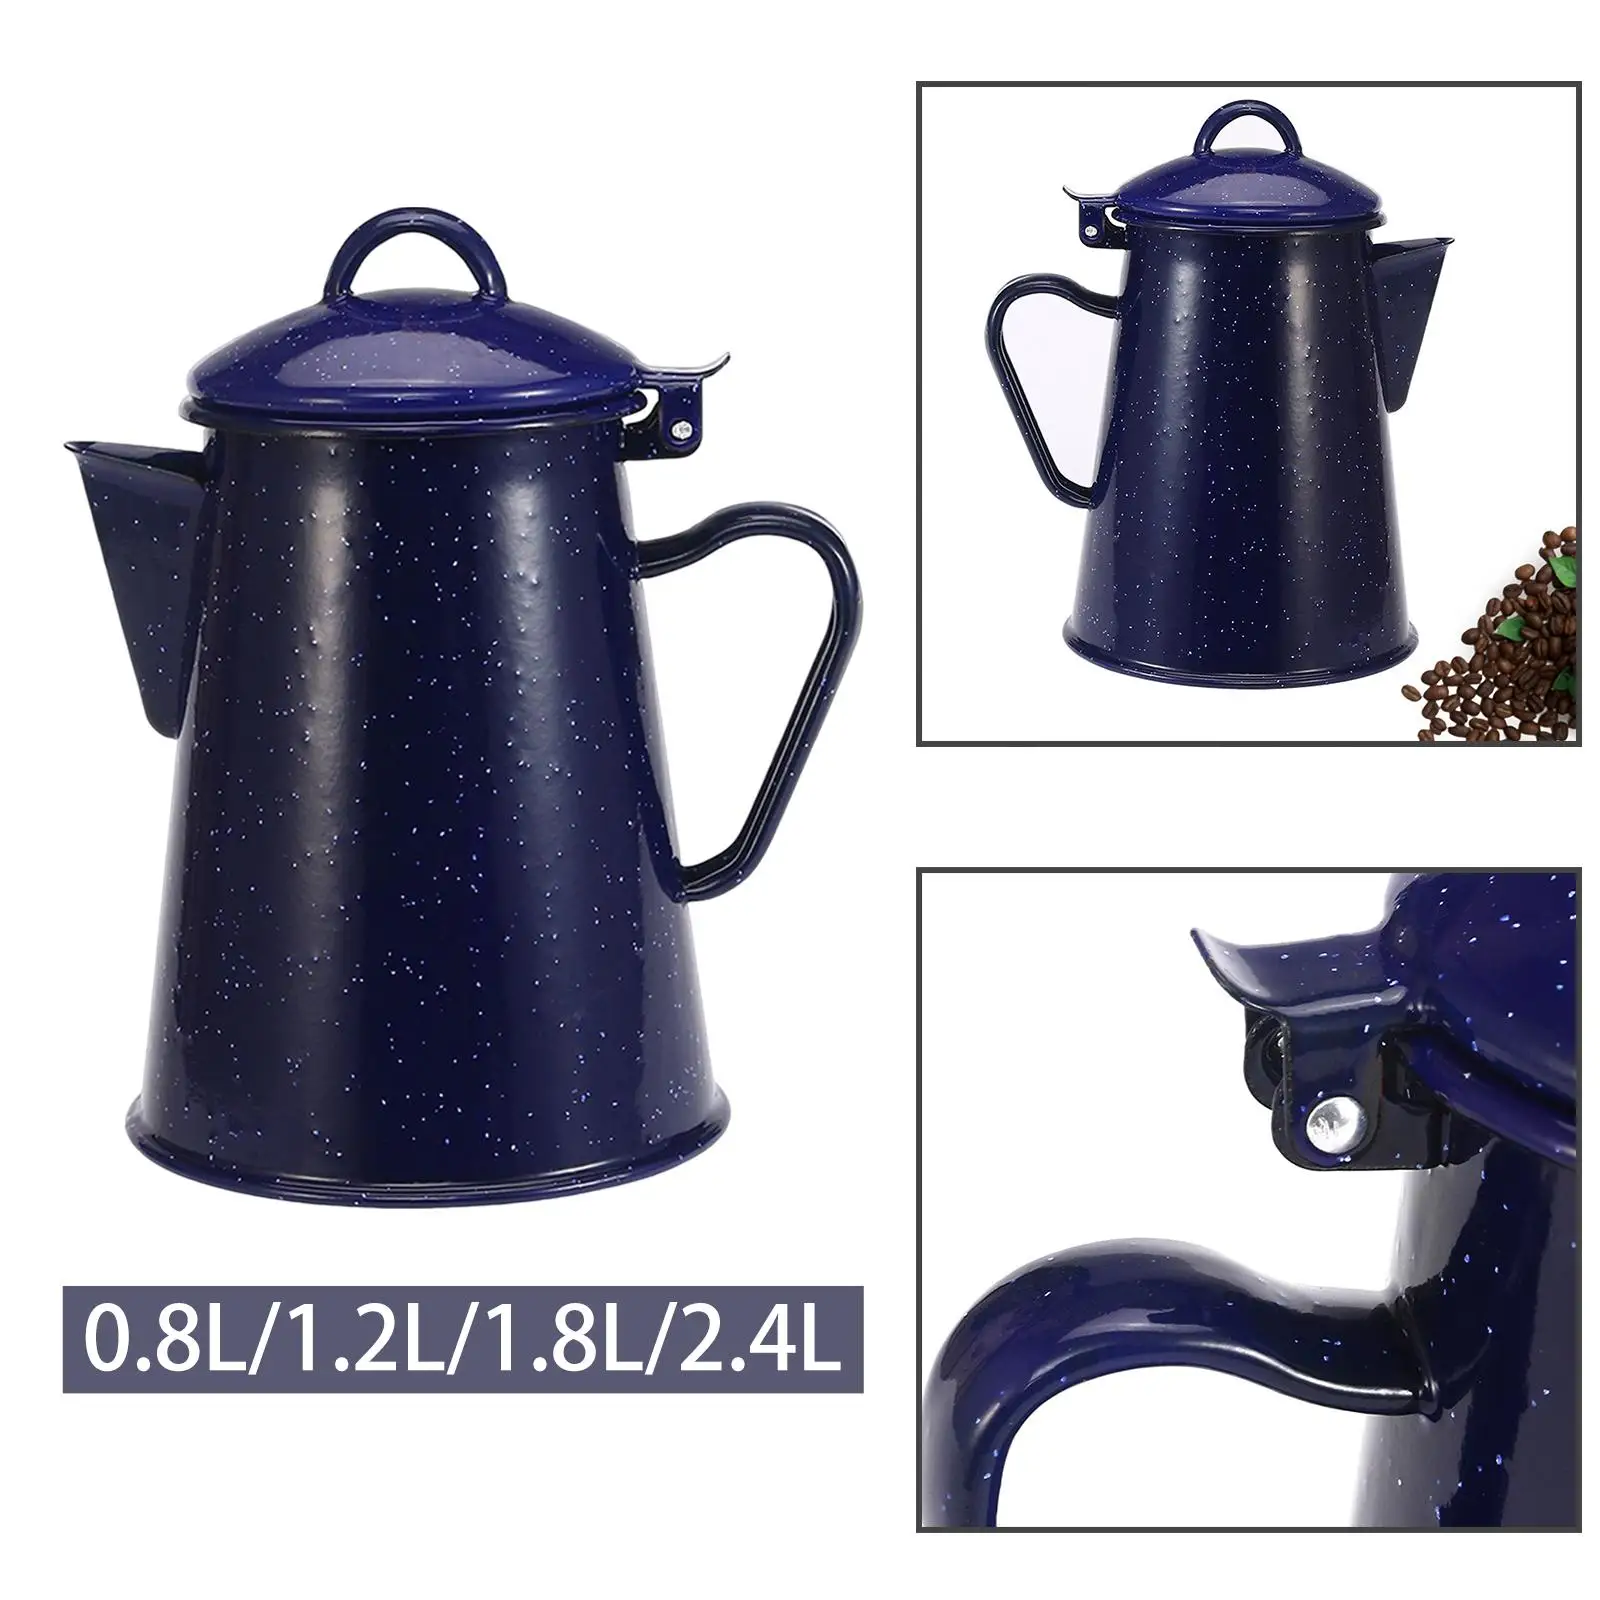 Enamel Coffee Kettle Cold Water Tea Pot Heat Resistant Safety Milk Beverage Dispenser Water Kettle for Home Office Party Kitchen